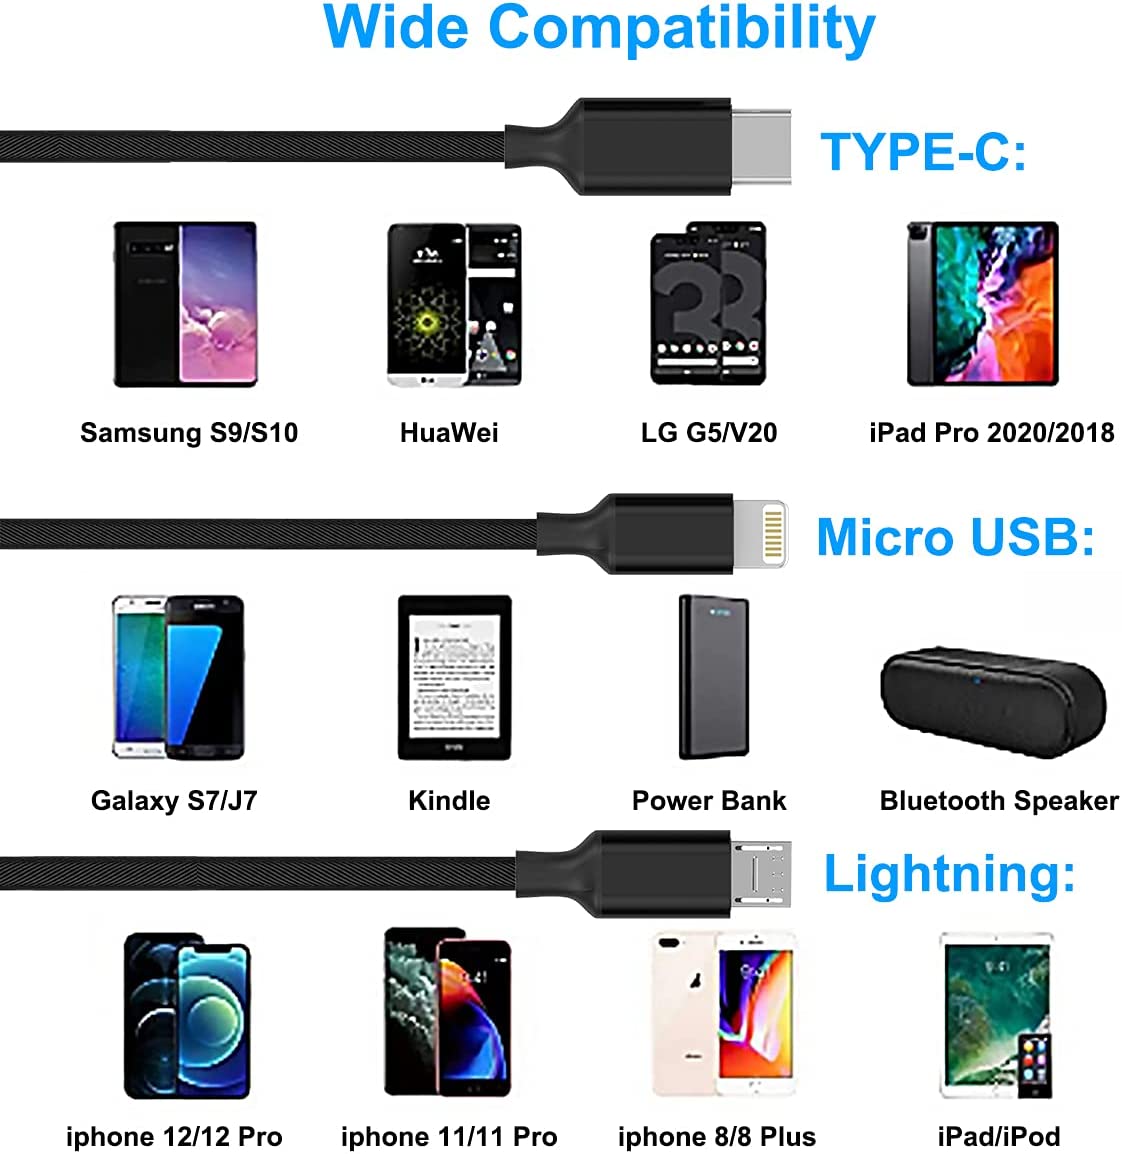 3-in-1 USB Cable Charging Wire Power Cord USB-C Sync - ONG86